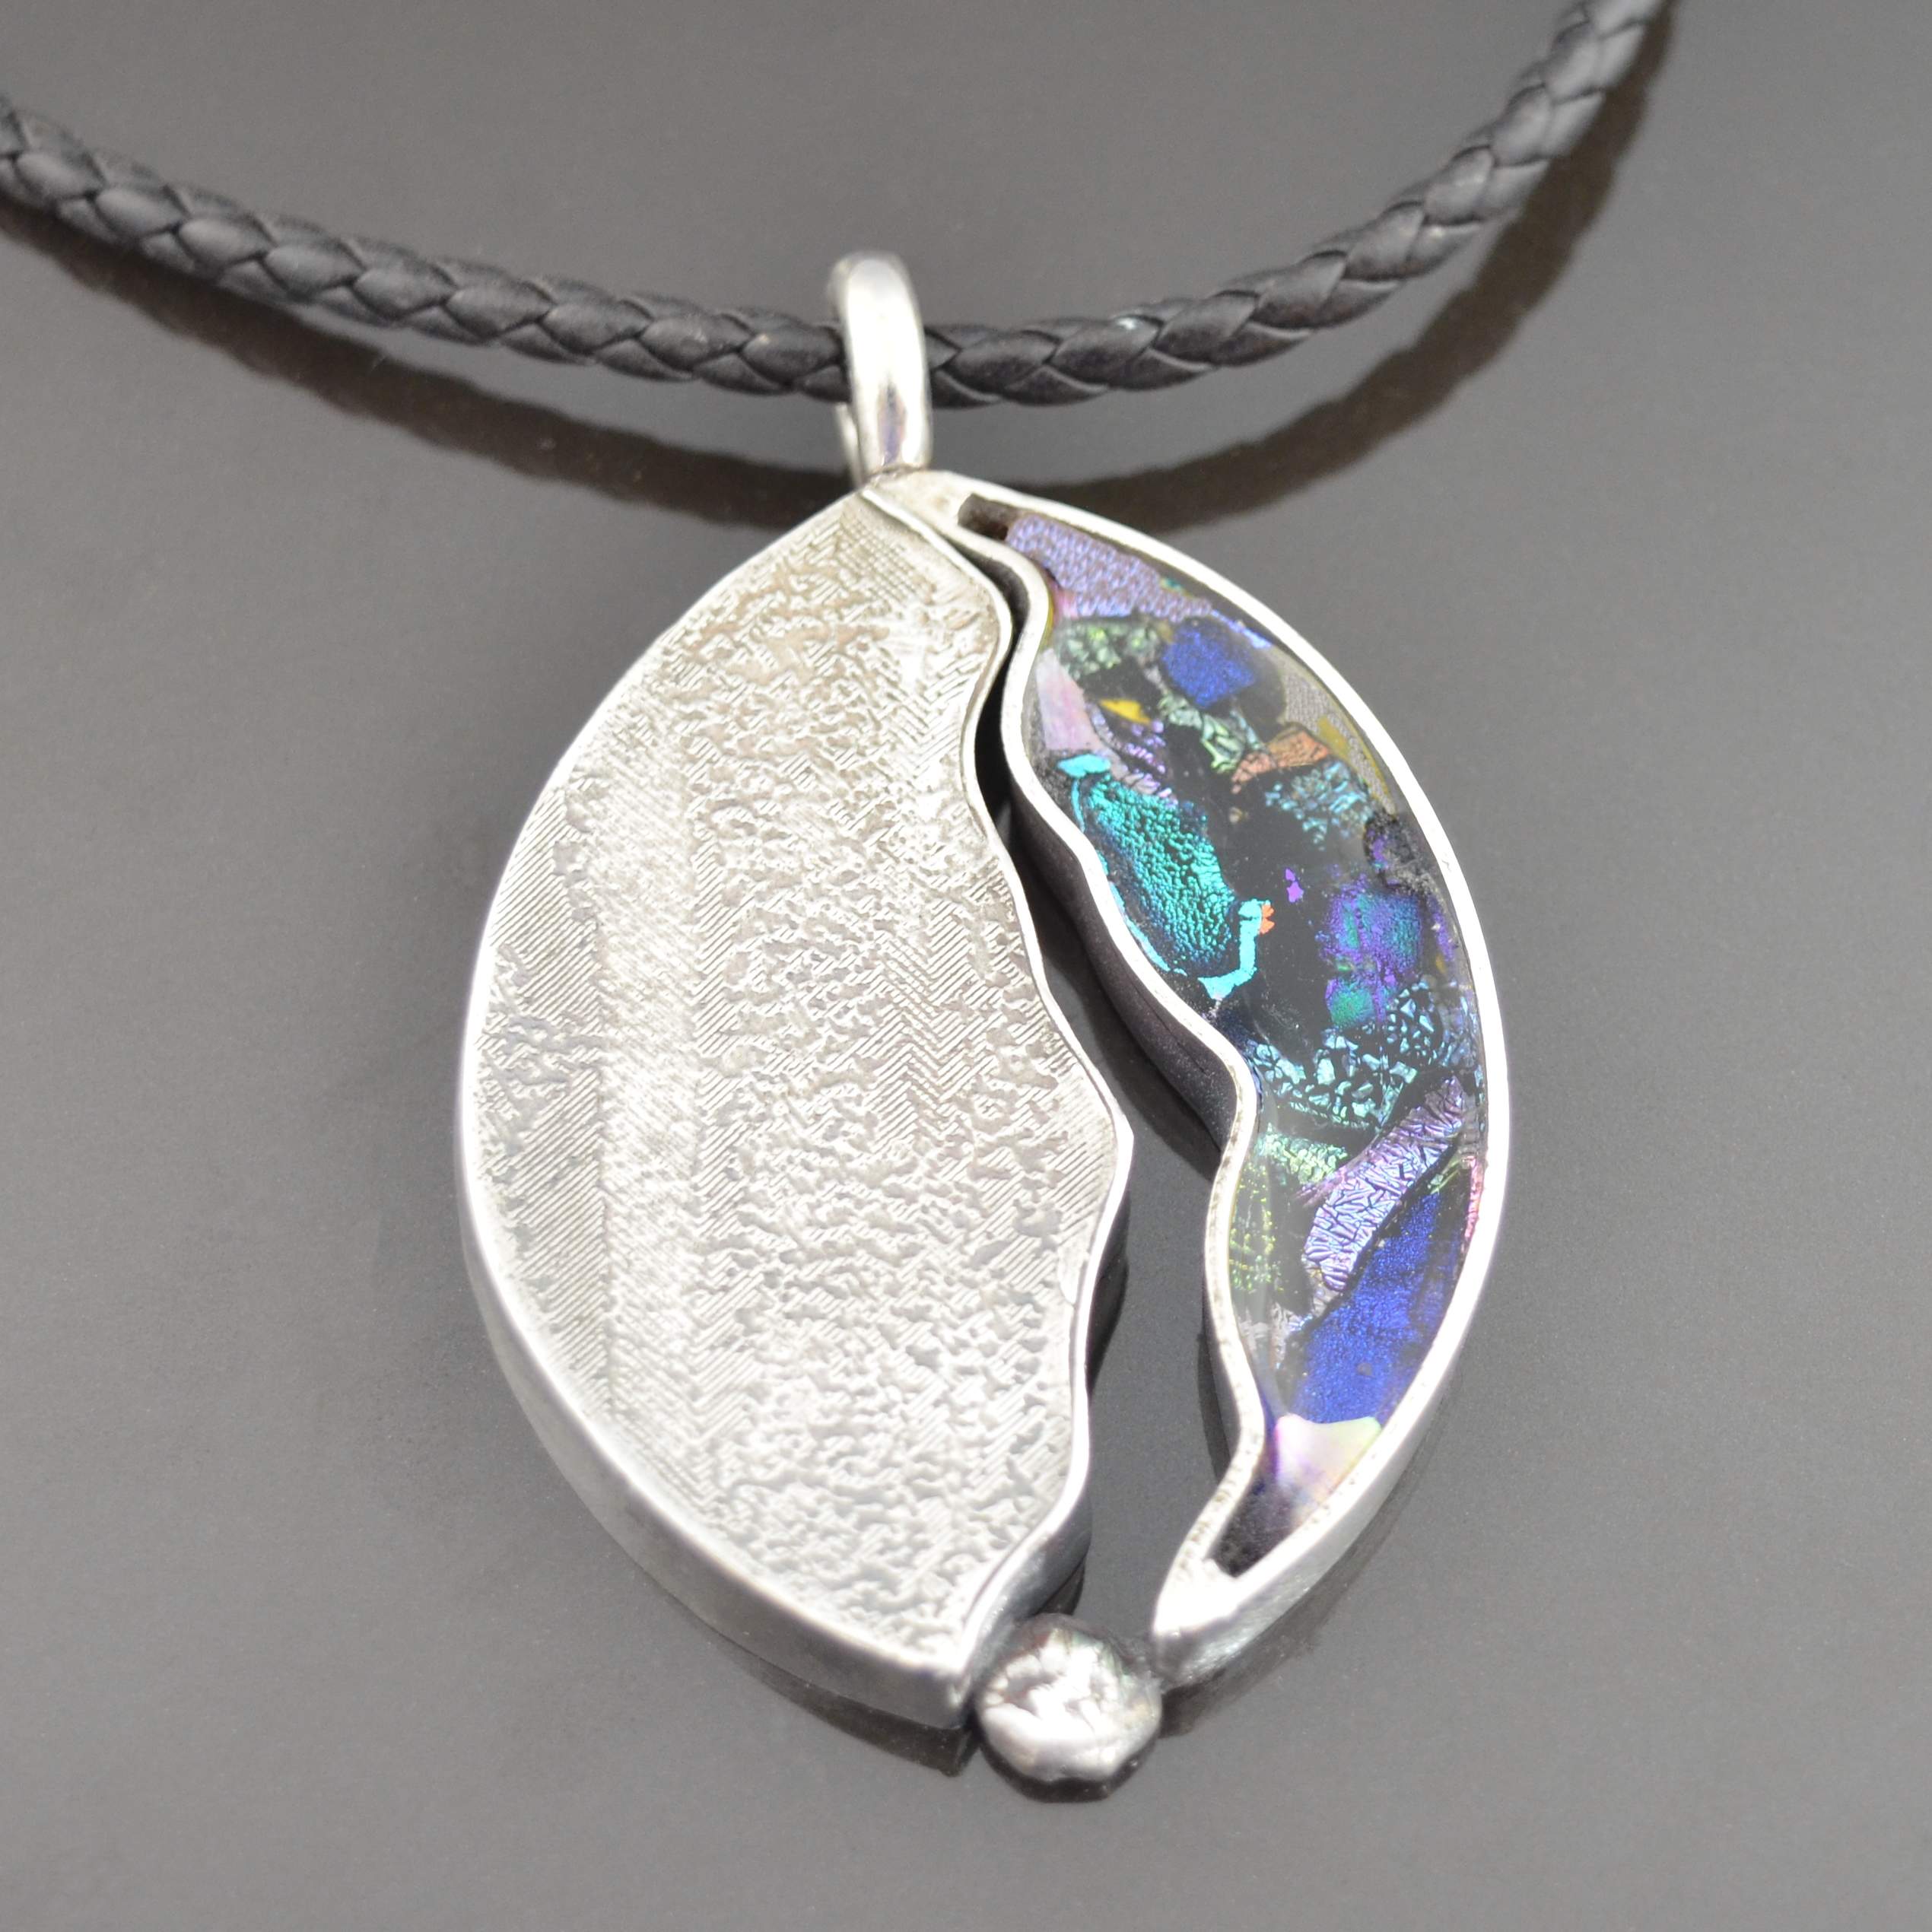 Glass and Silver Reflections Pendant by Tracey Spurgin of Craftworx Jewellery Workshops